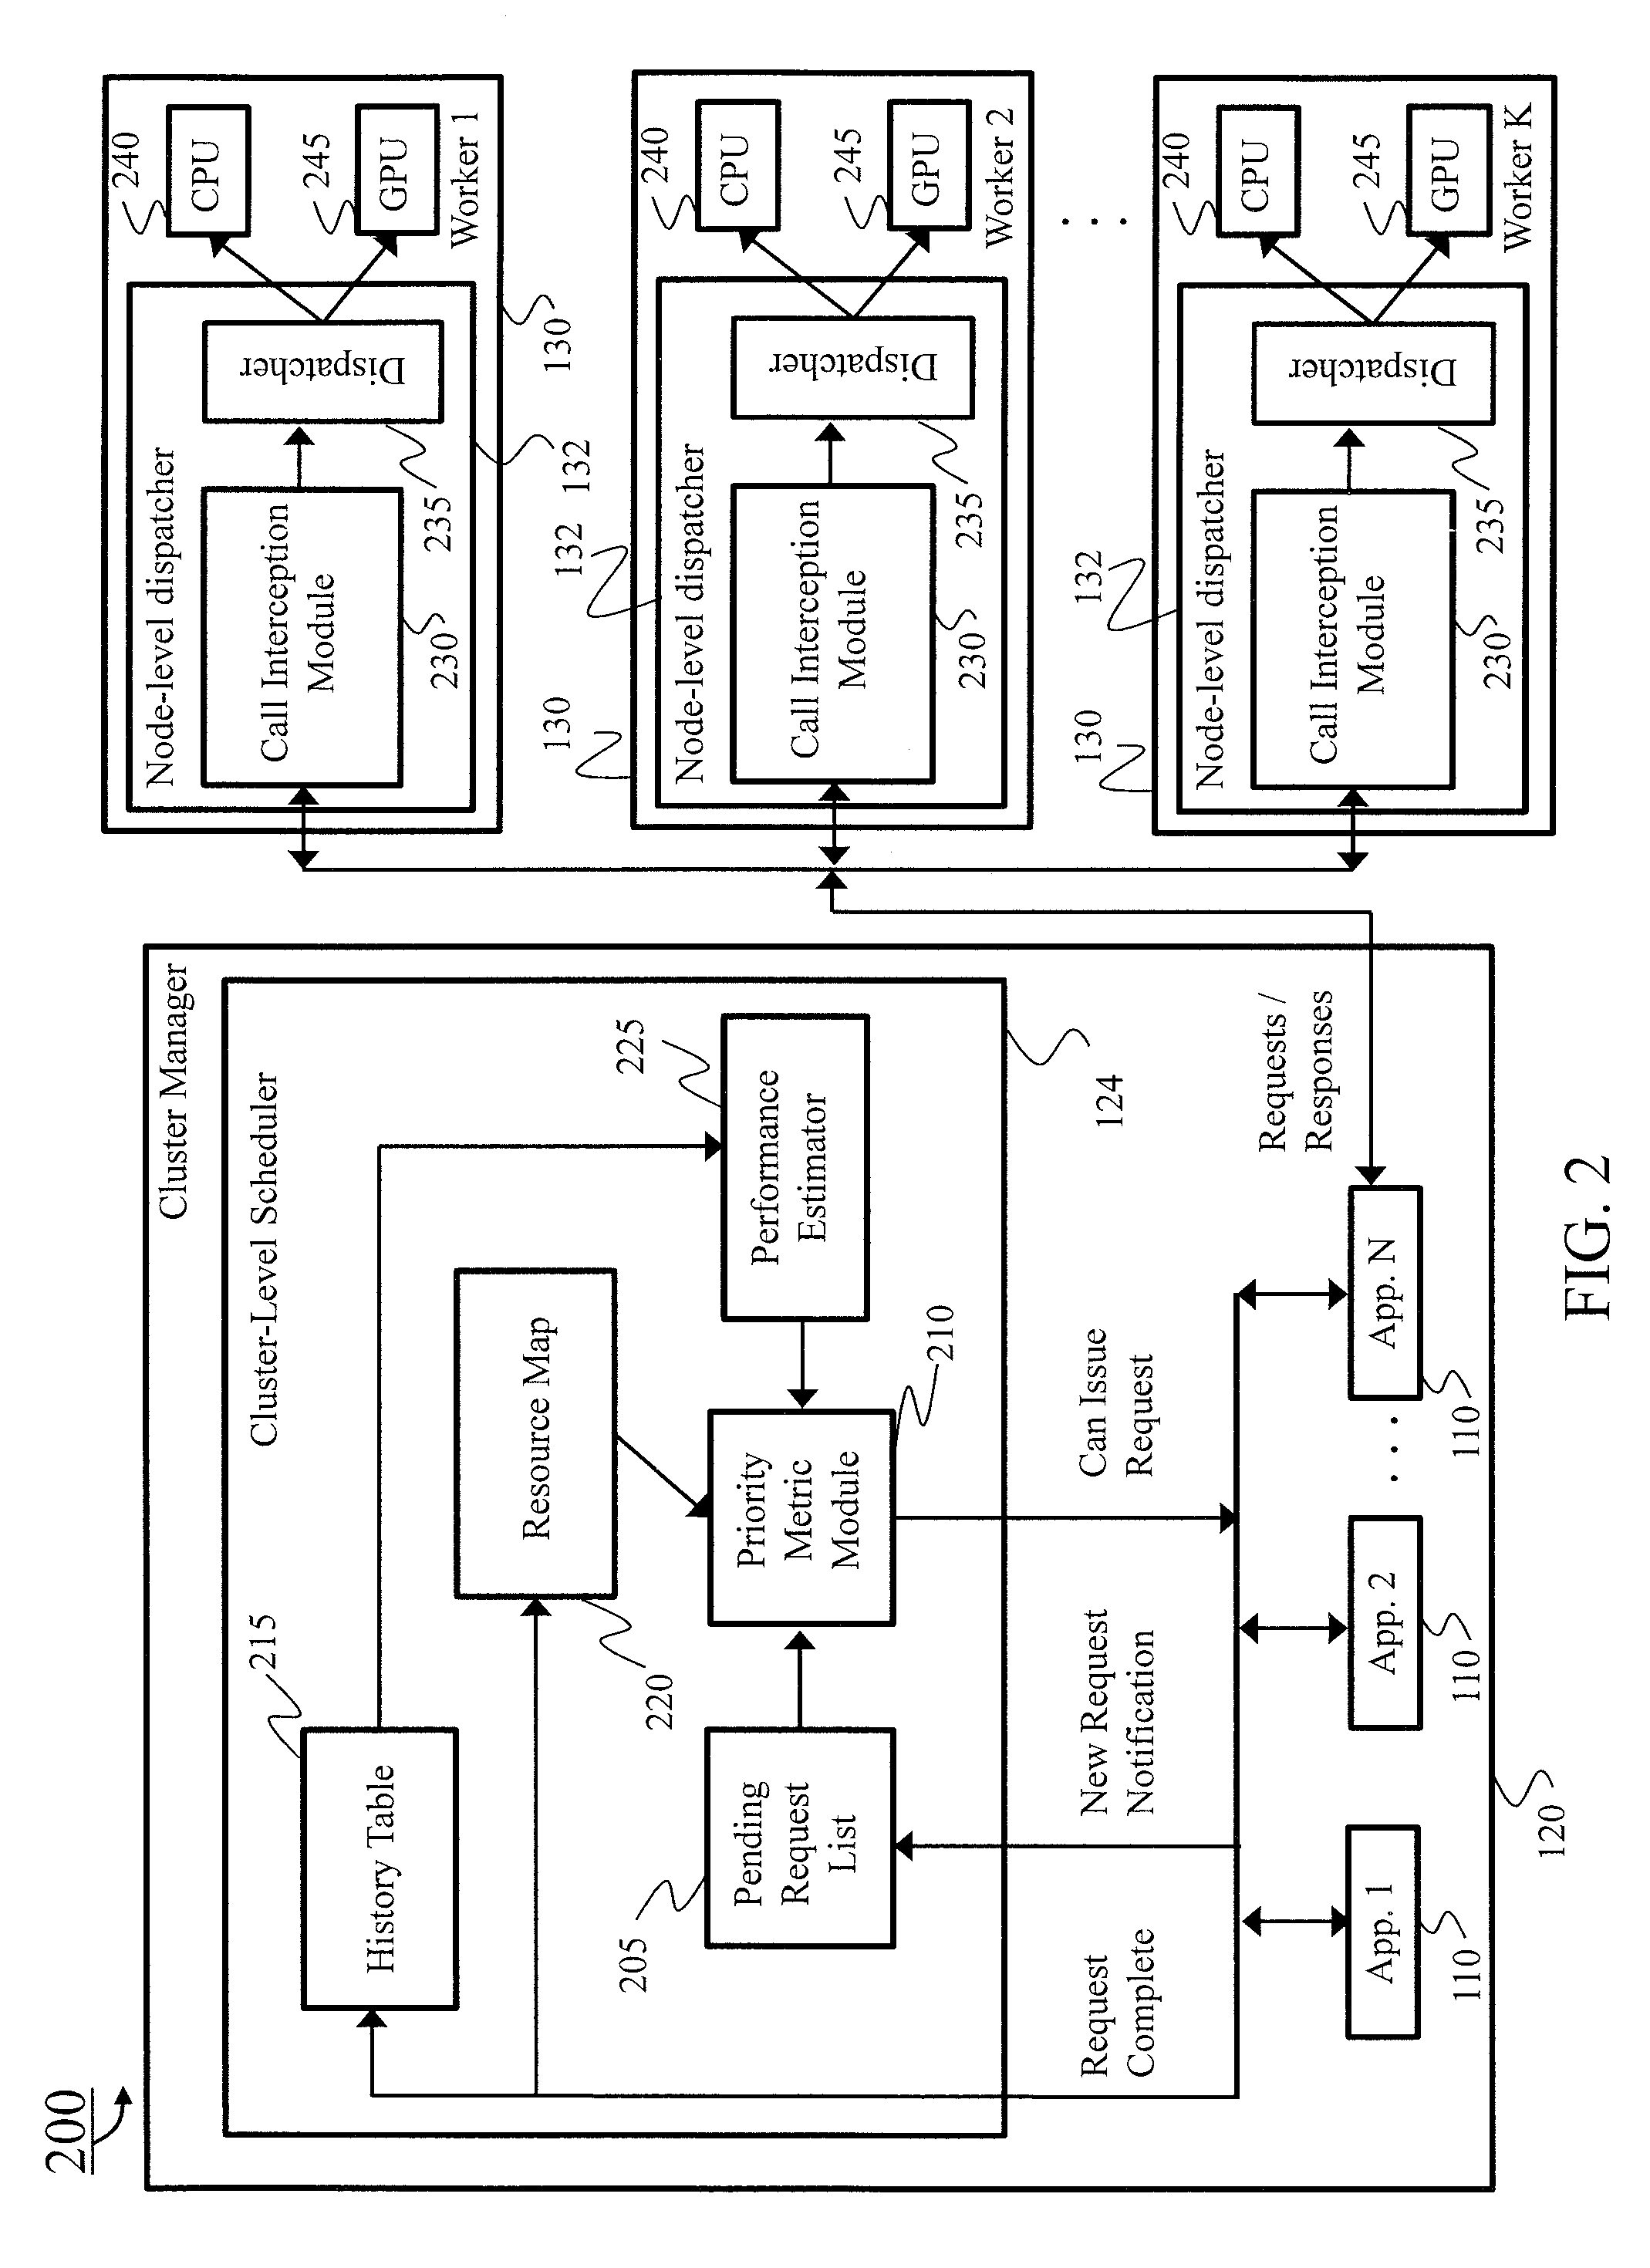  scheduler and resource manager for coprocessor-based heterogeneous clusters